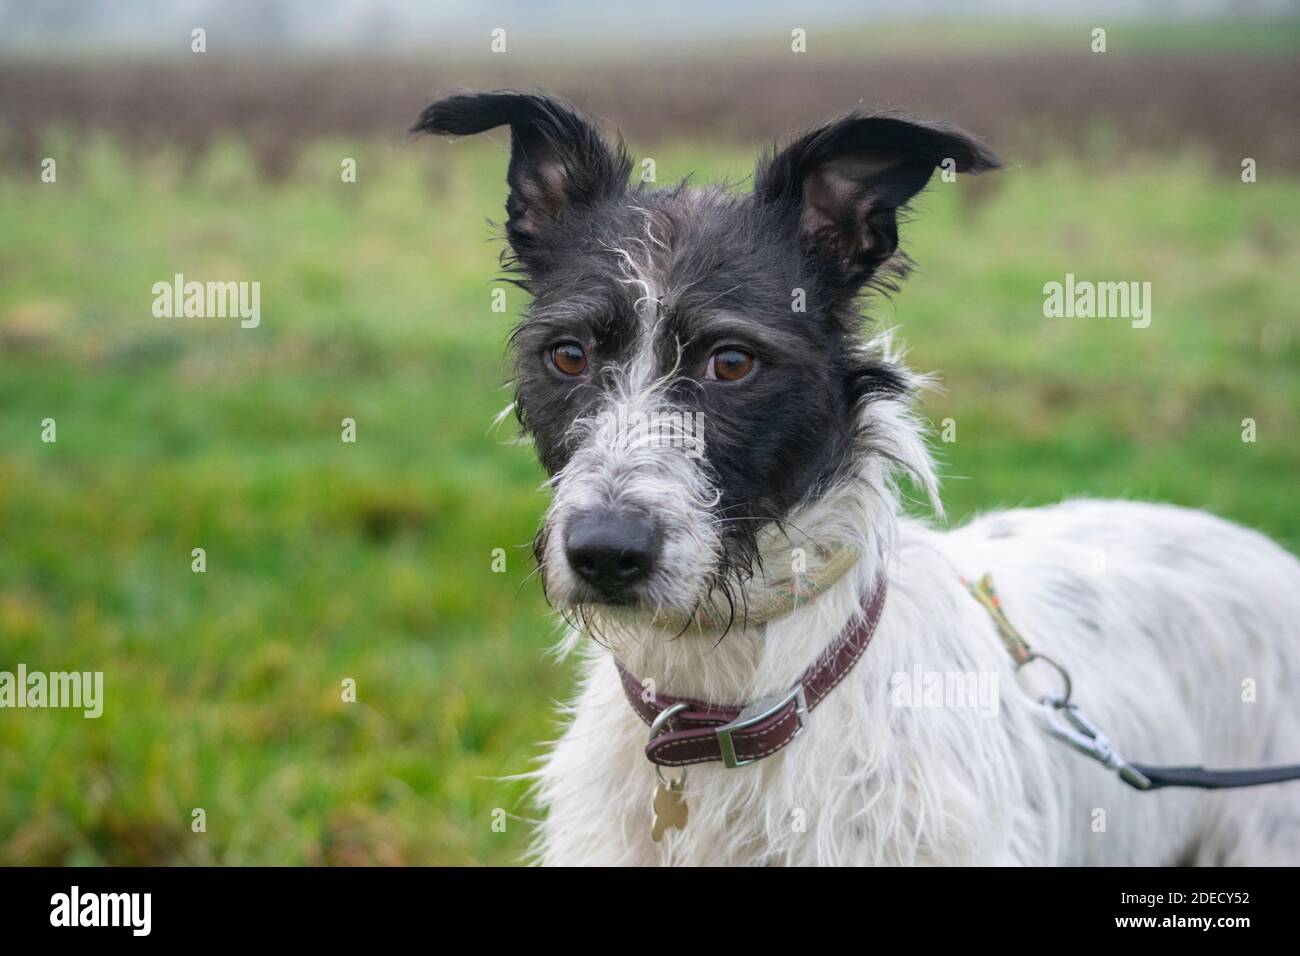 Lurcher type dog in a field Stock Photo